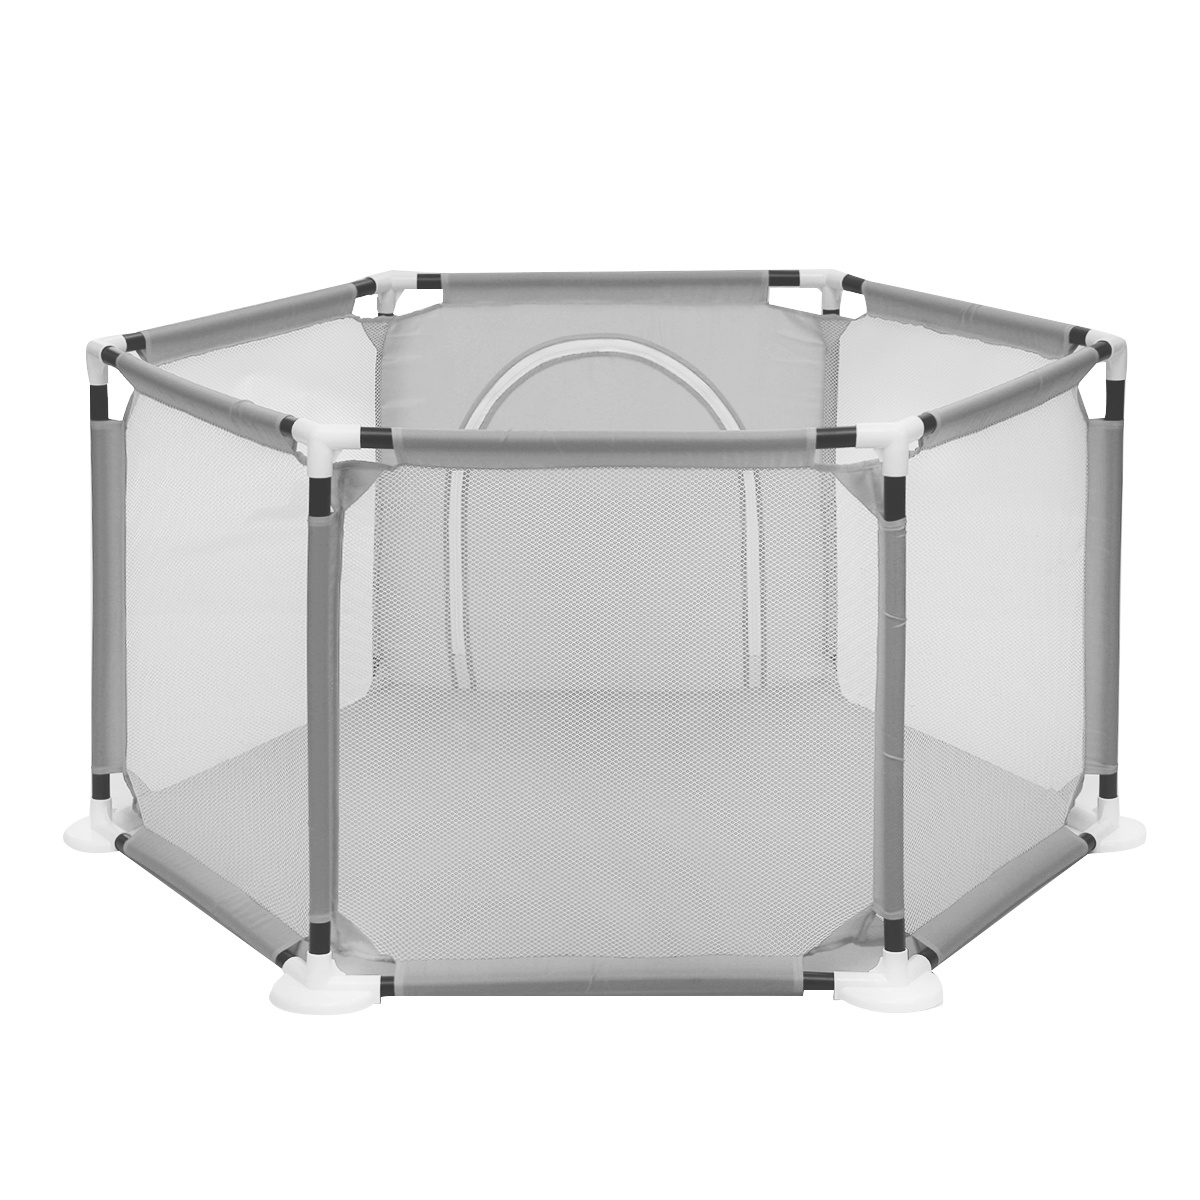 "SINGES Deluxe Portable Baby Playpen, 6-Panel Play Yard with Breathable Mesh & Zipper Door, Indoors or Outdoors Play Space Interactive  Fence for Babies Toddler Infant,Grey" - image 7 of 8